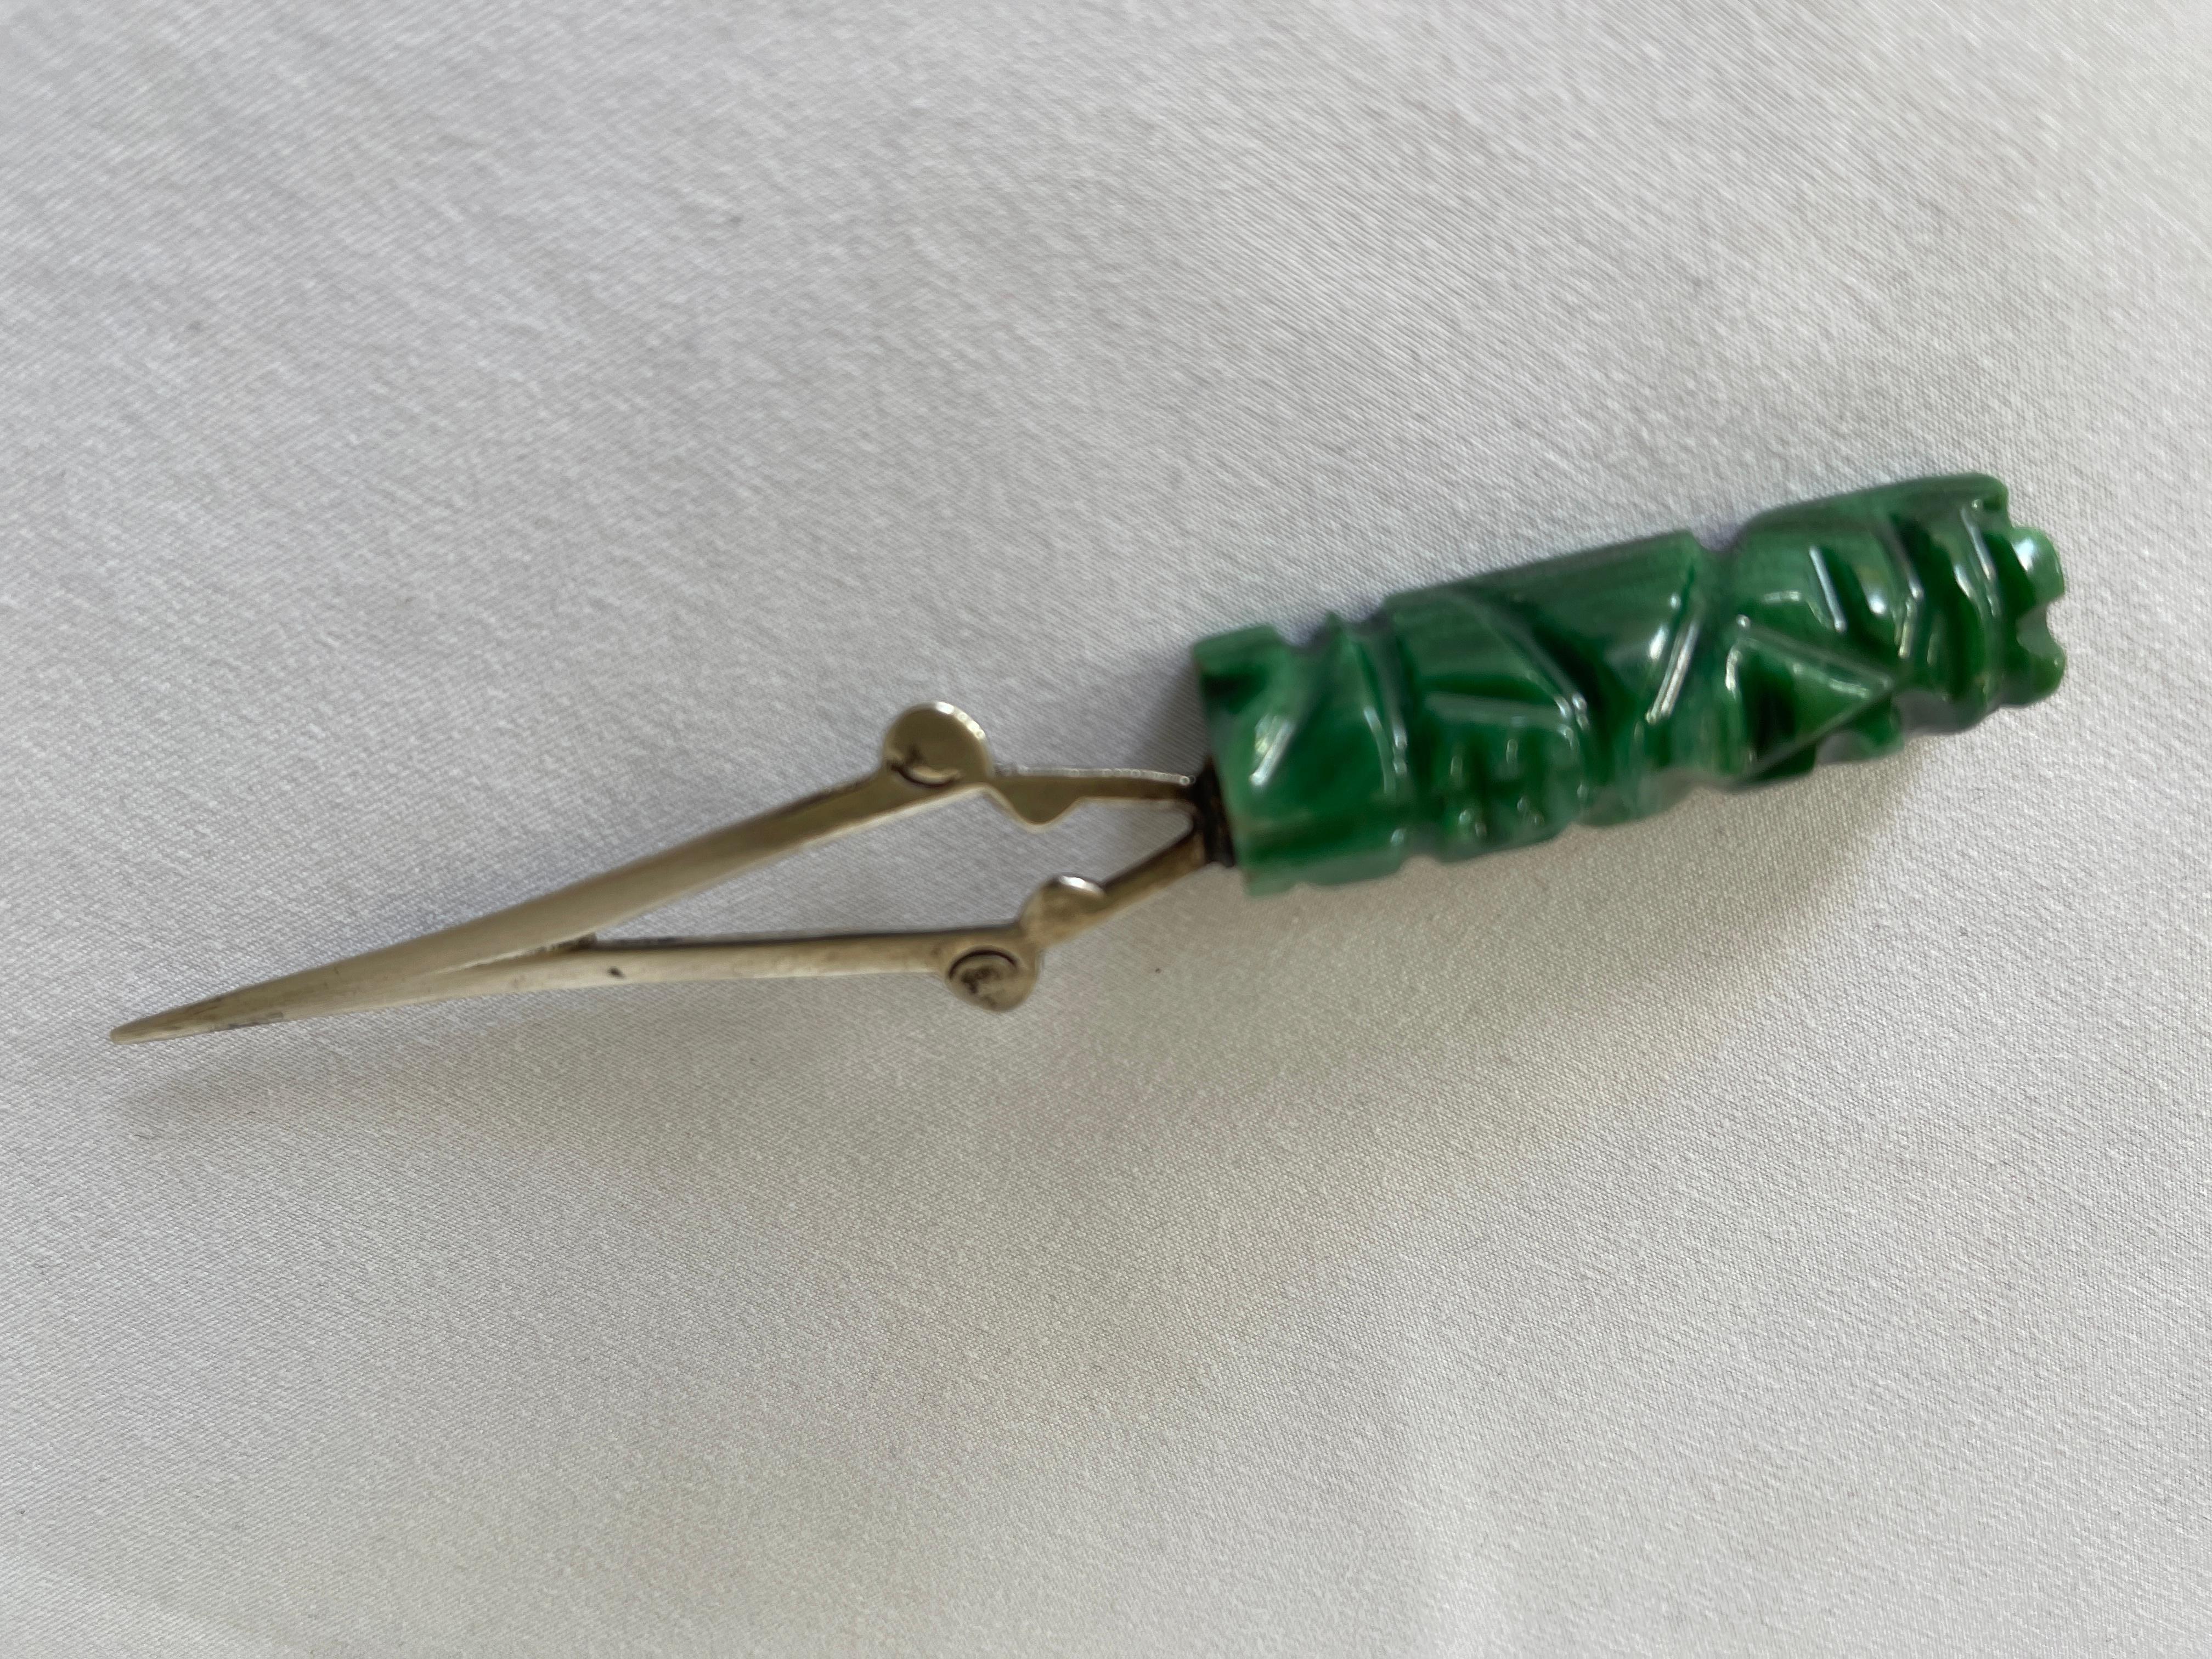 Mexican mid century modern hand wrought 950 silver letter opener with hand carved Aztec motif green onyx handle. Hallmark stamped underside, 950